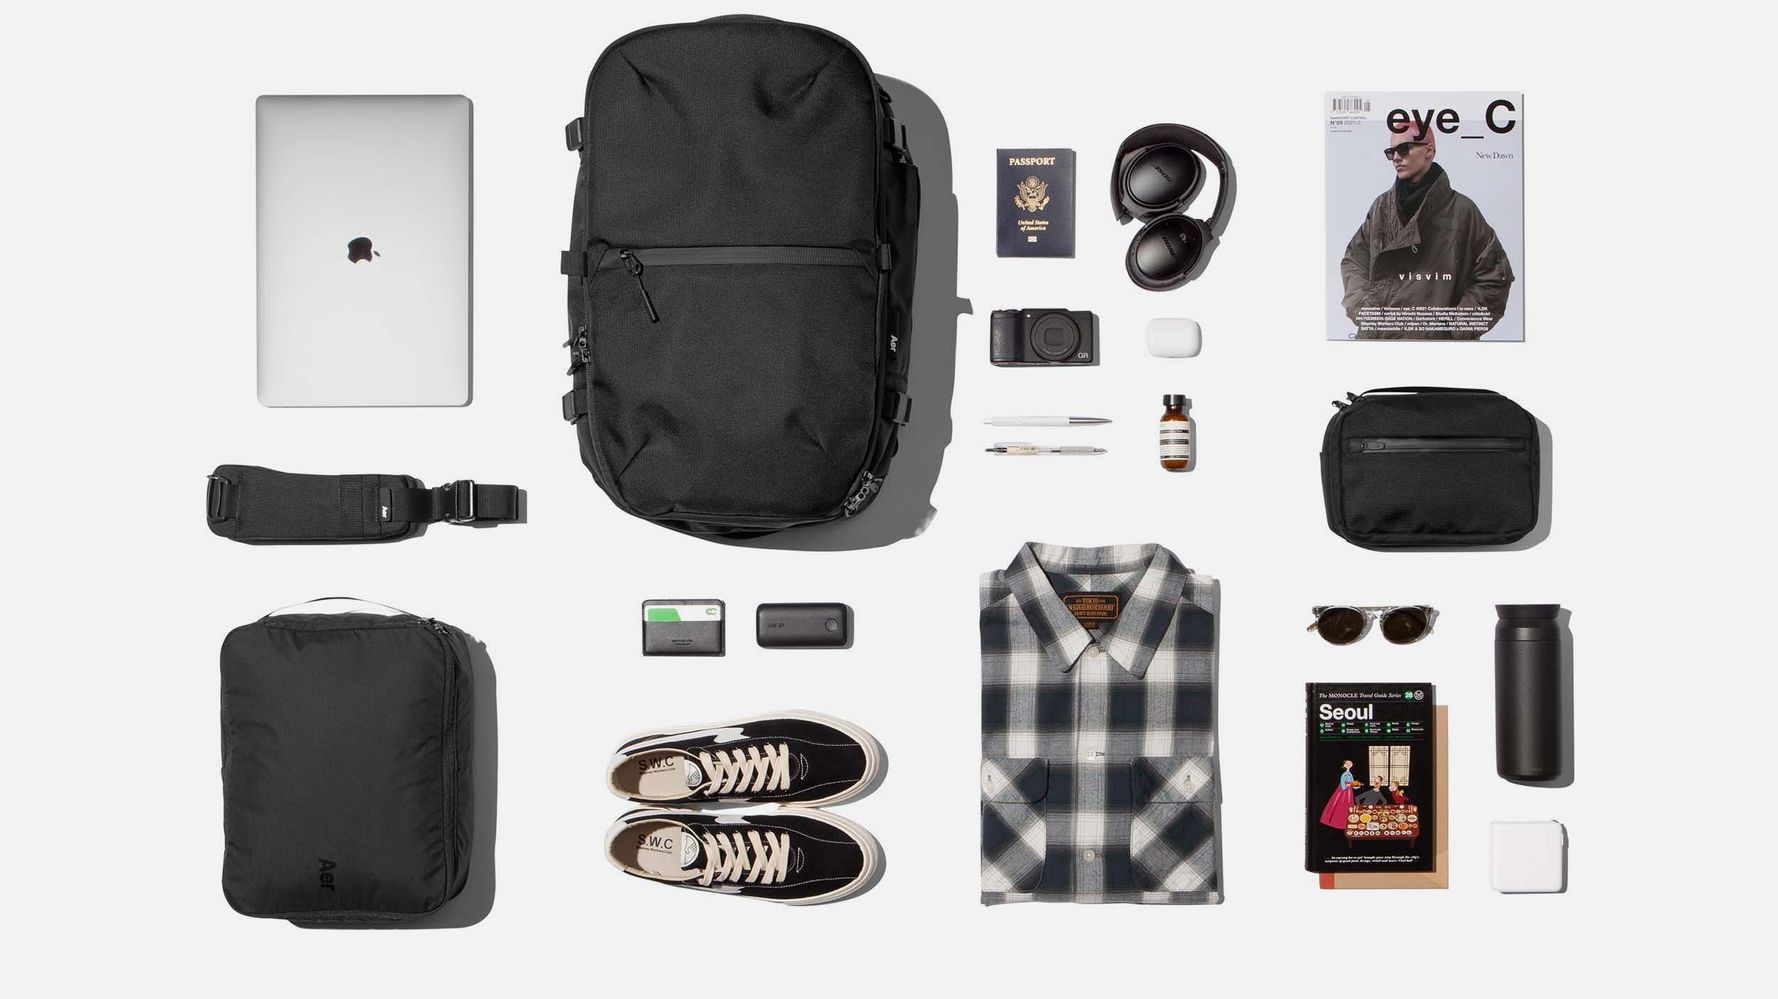 Minimalistic backpacks, tote bags, travel bags, and leather goods.